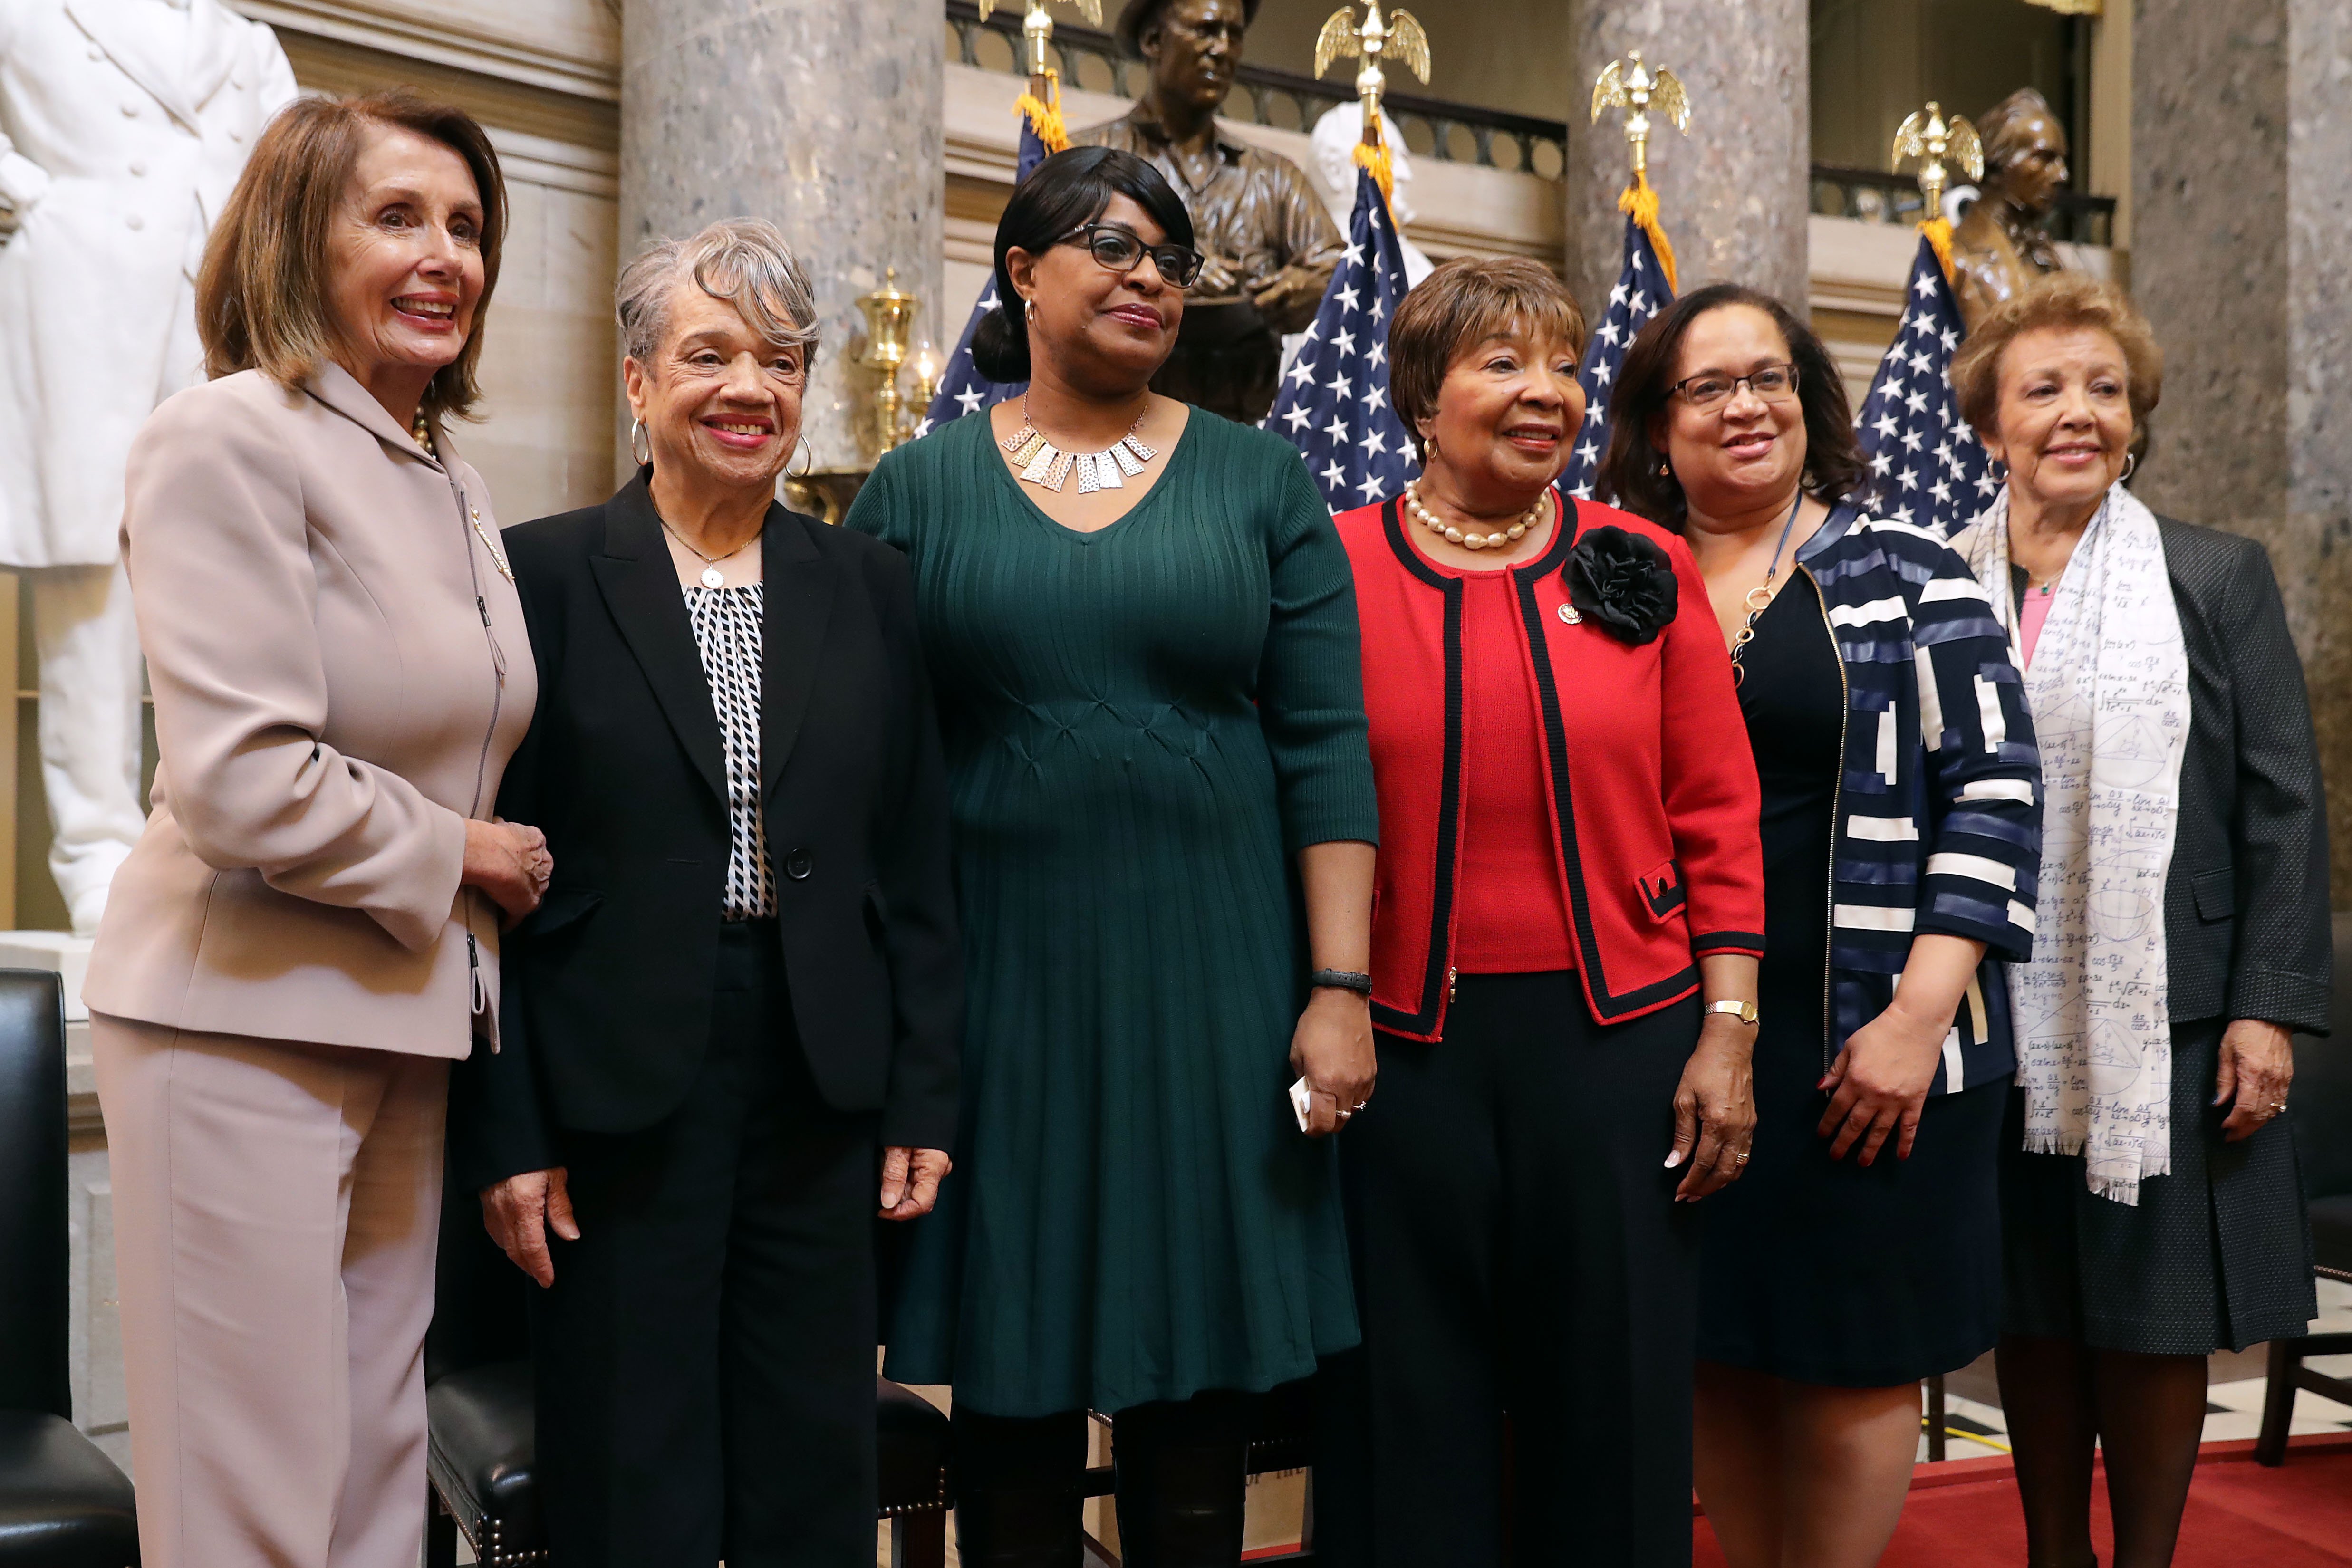 Speaker of the House Nancy Pelosi, Dr. Christine Darden, Carolyn Lewis, Rep. Eddie Bernice Johnson, Maida Robinson and Joylette Hylick at the U.S. Capitol March 27, 2019. | Source: Getty Images